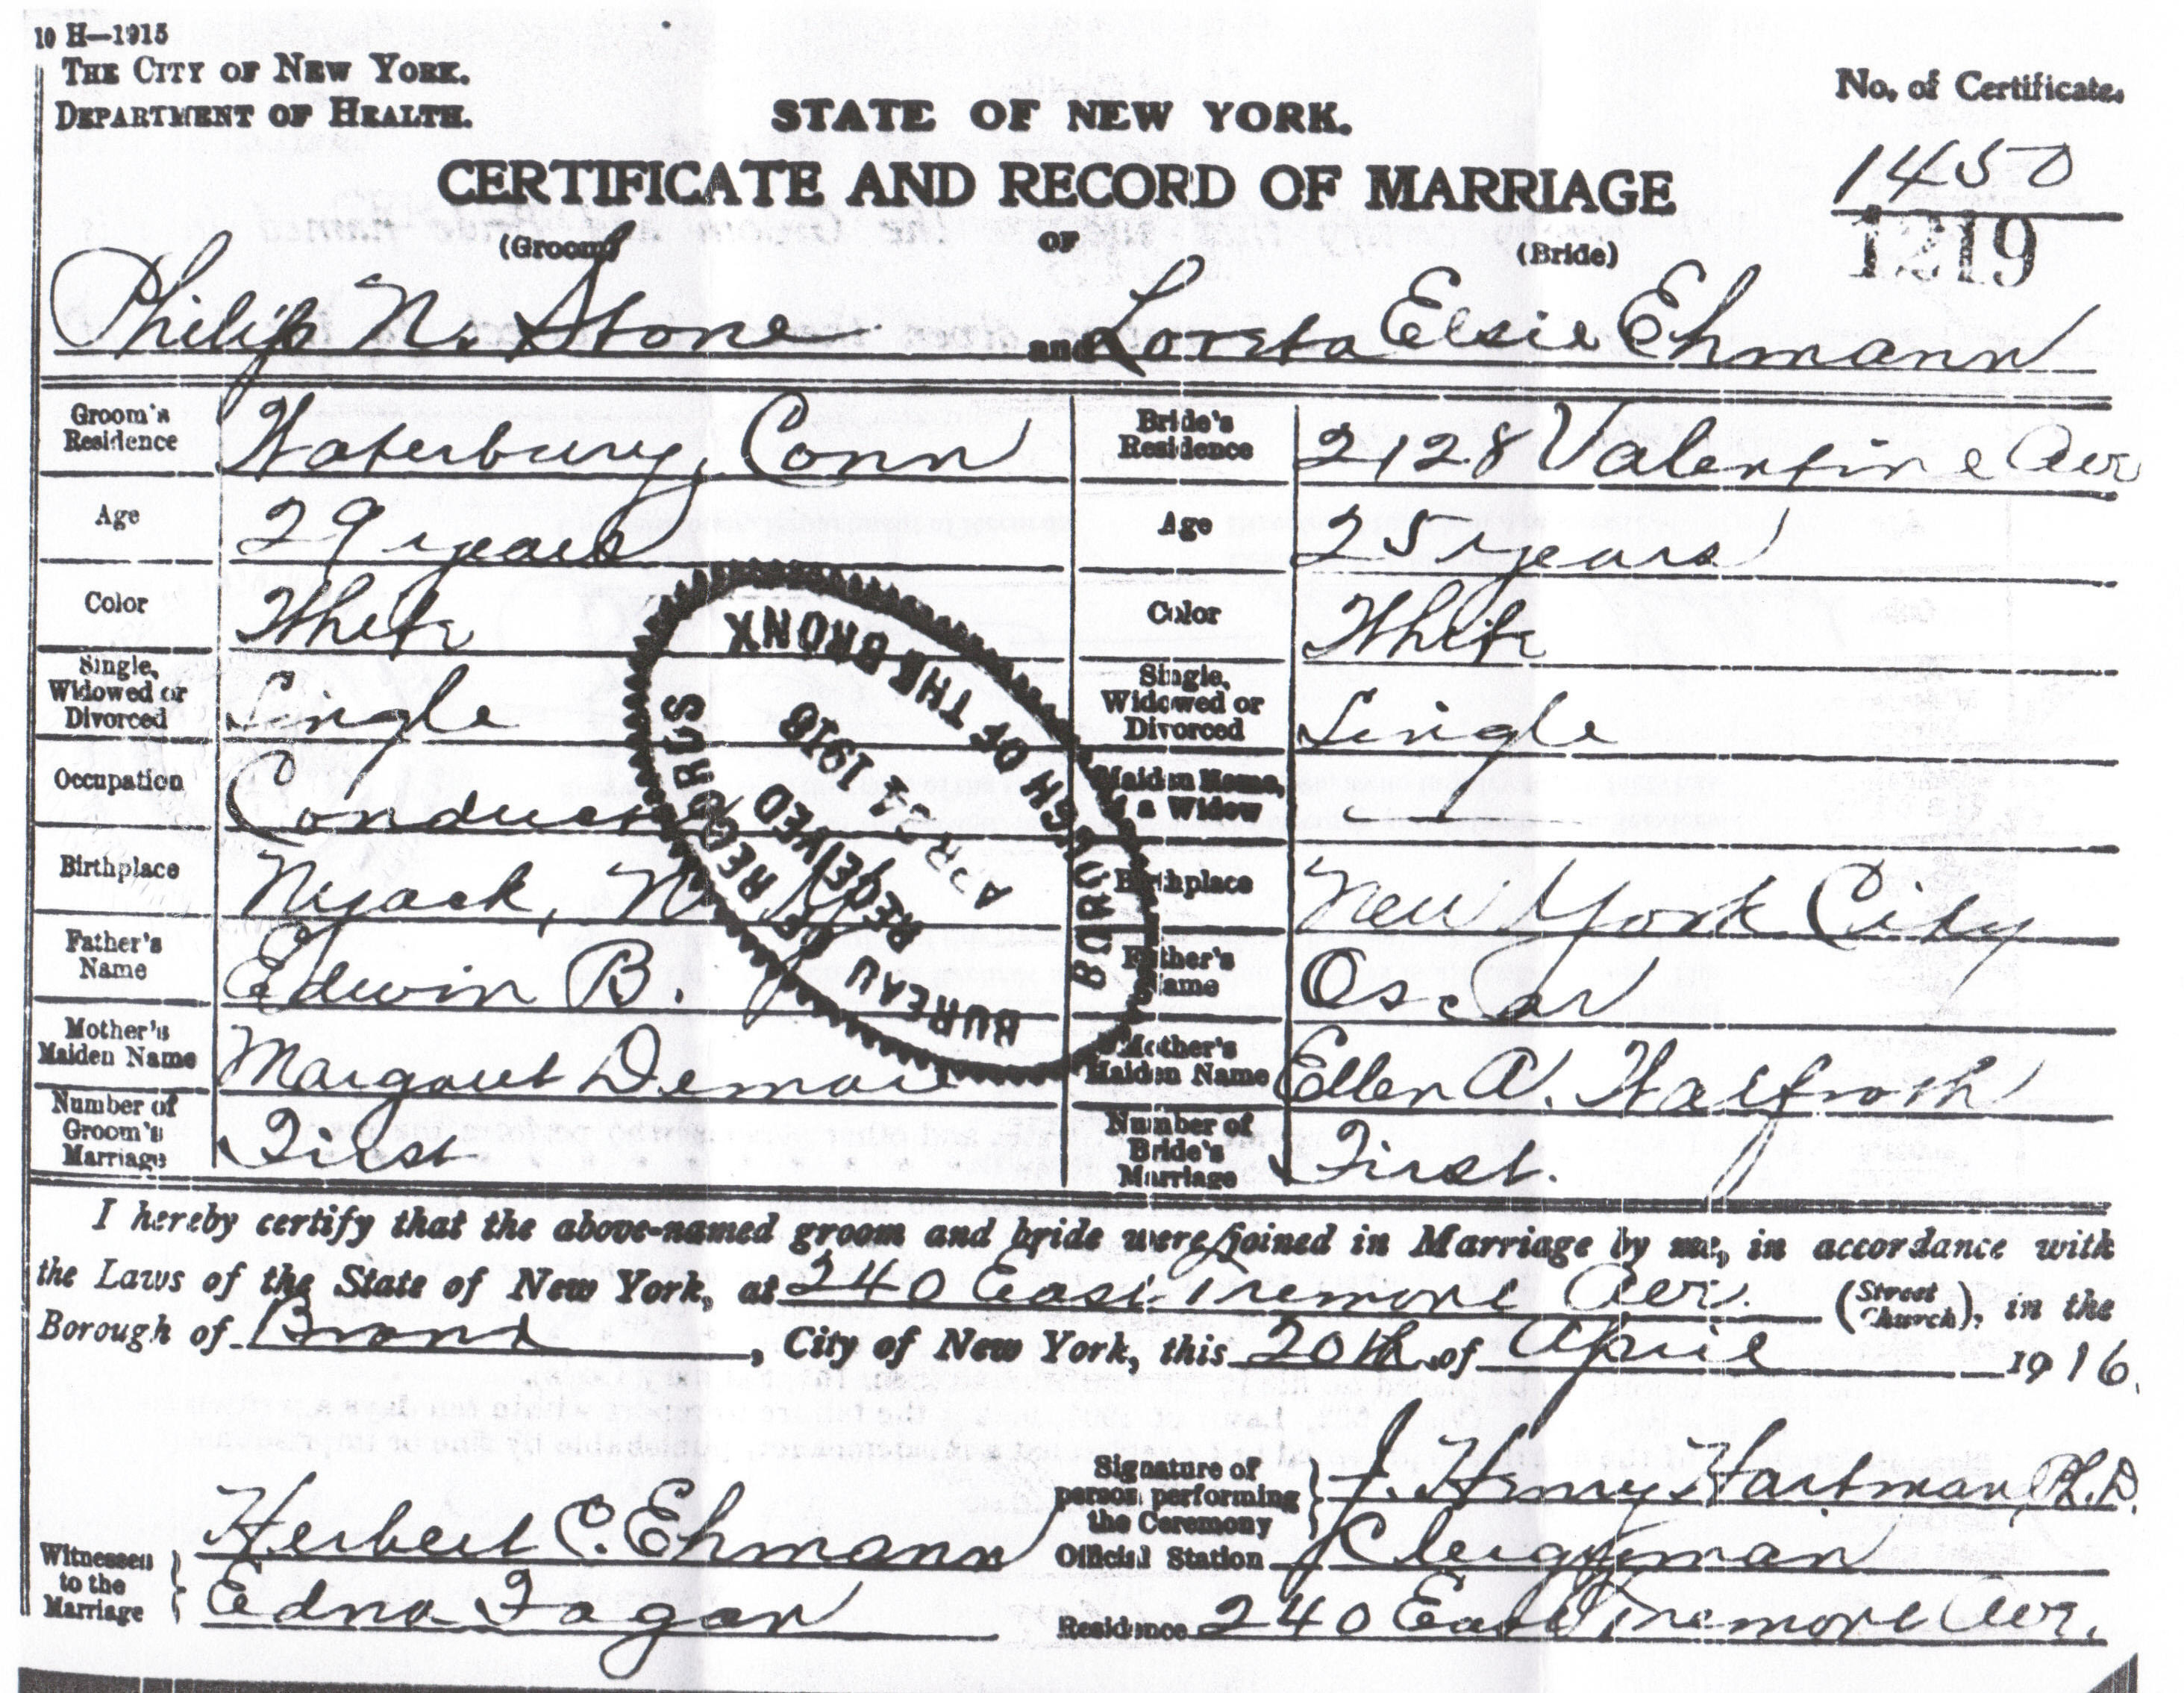 Marriage certificate of Philip Nelson Stone and Loretta Elsie Ehmann, 1916